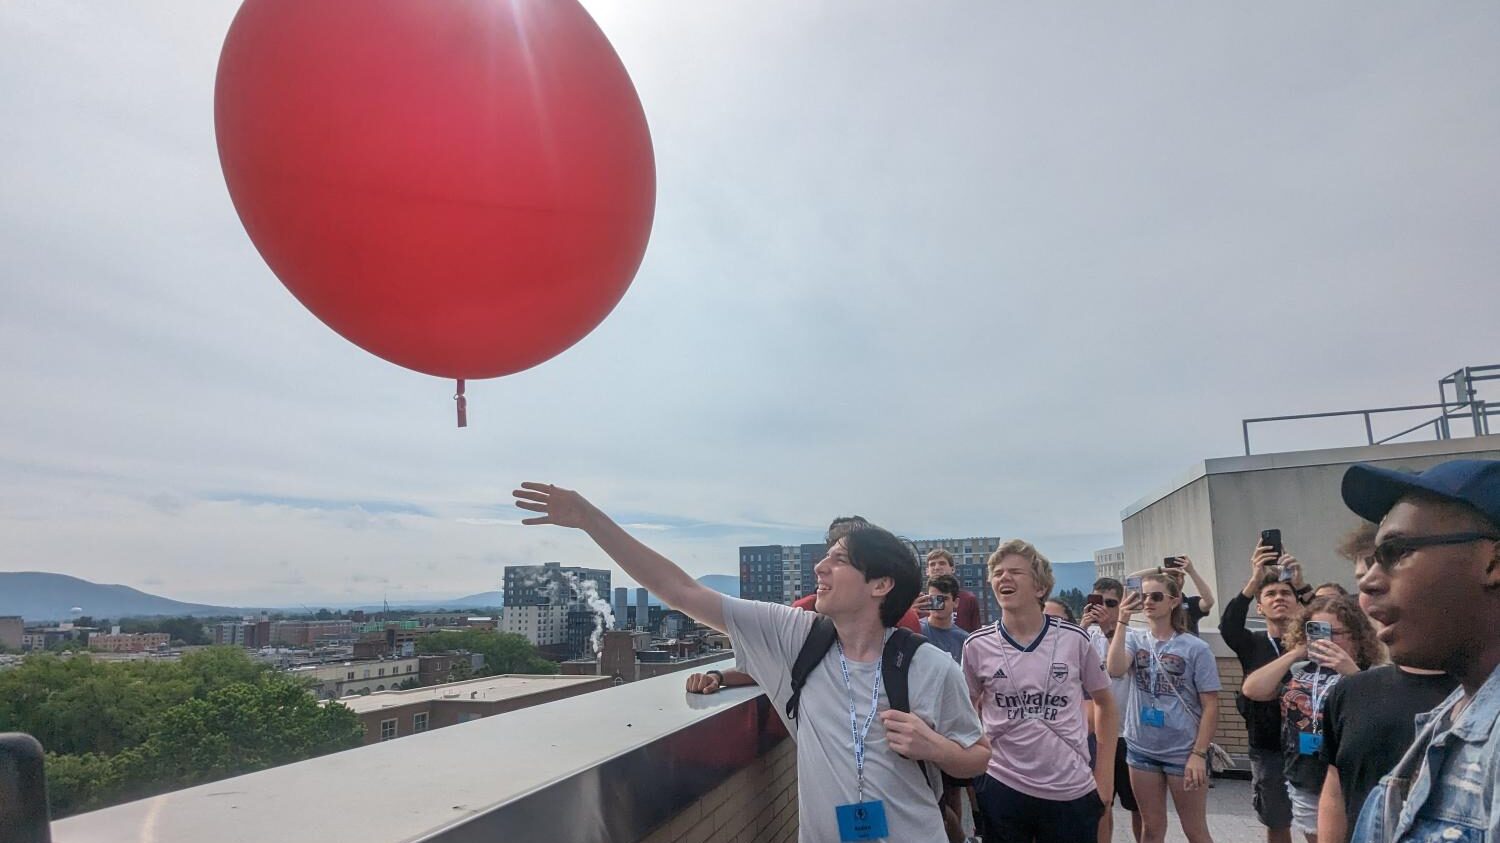 Students participating in Weather Camp at Penn State release a weather balloon from the roof of a parking deck.